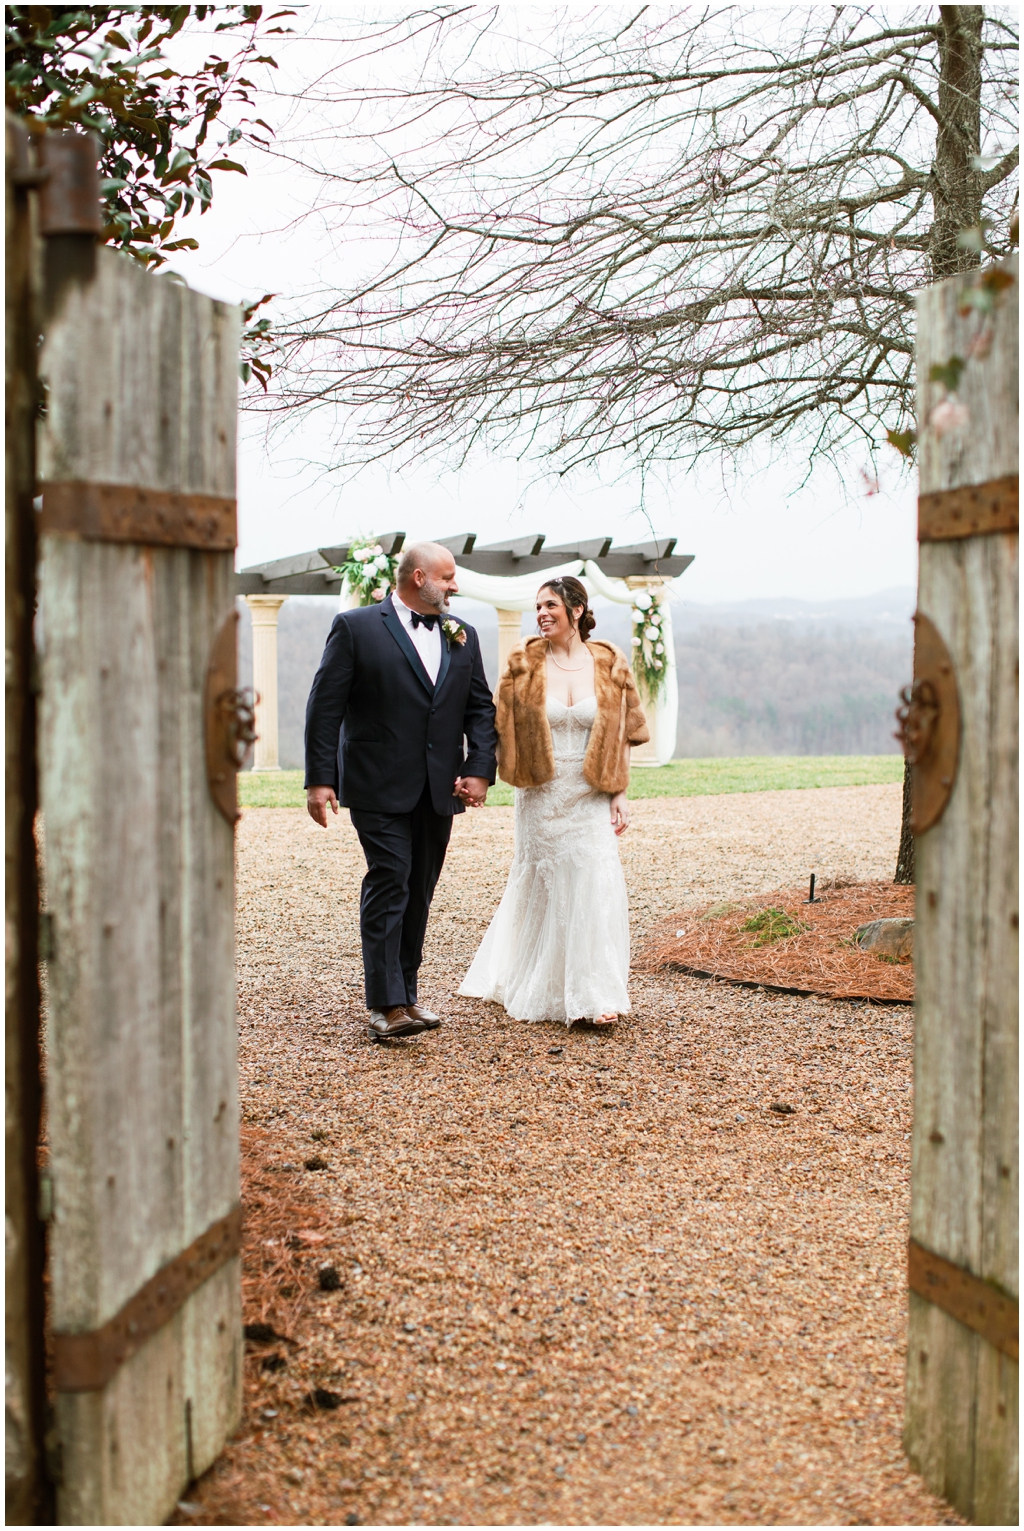 Winter wedding in east TN at Chateau Selah. Image by Holly Michon Photography.